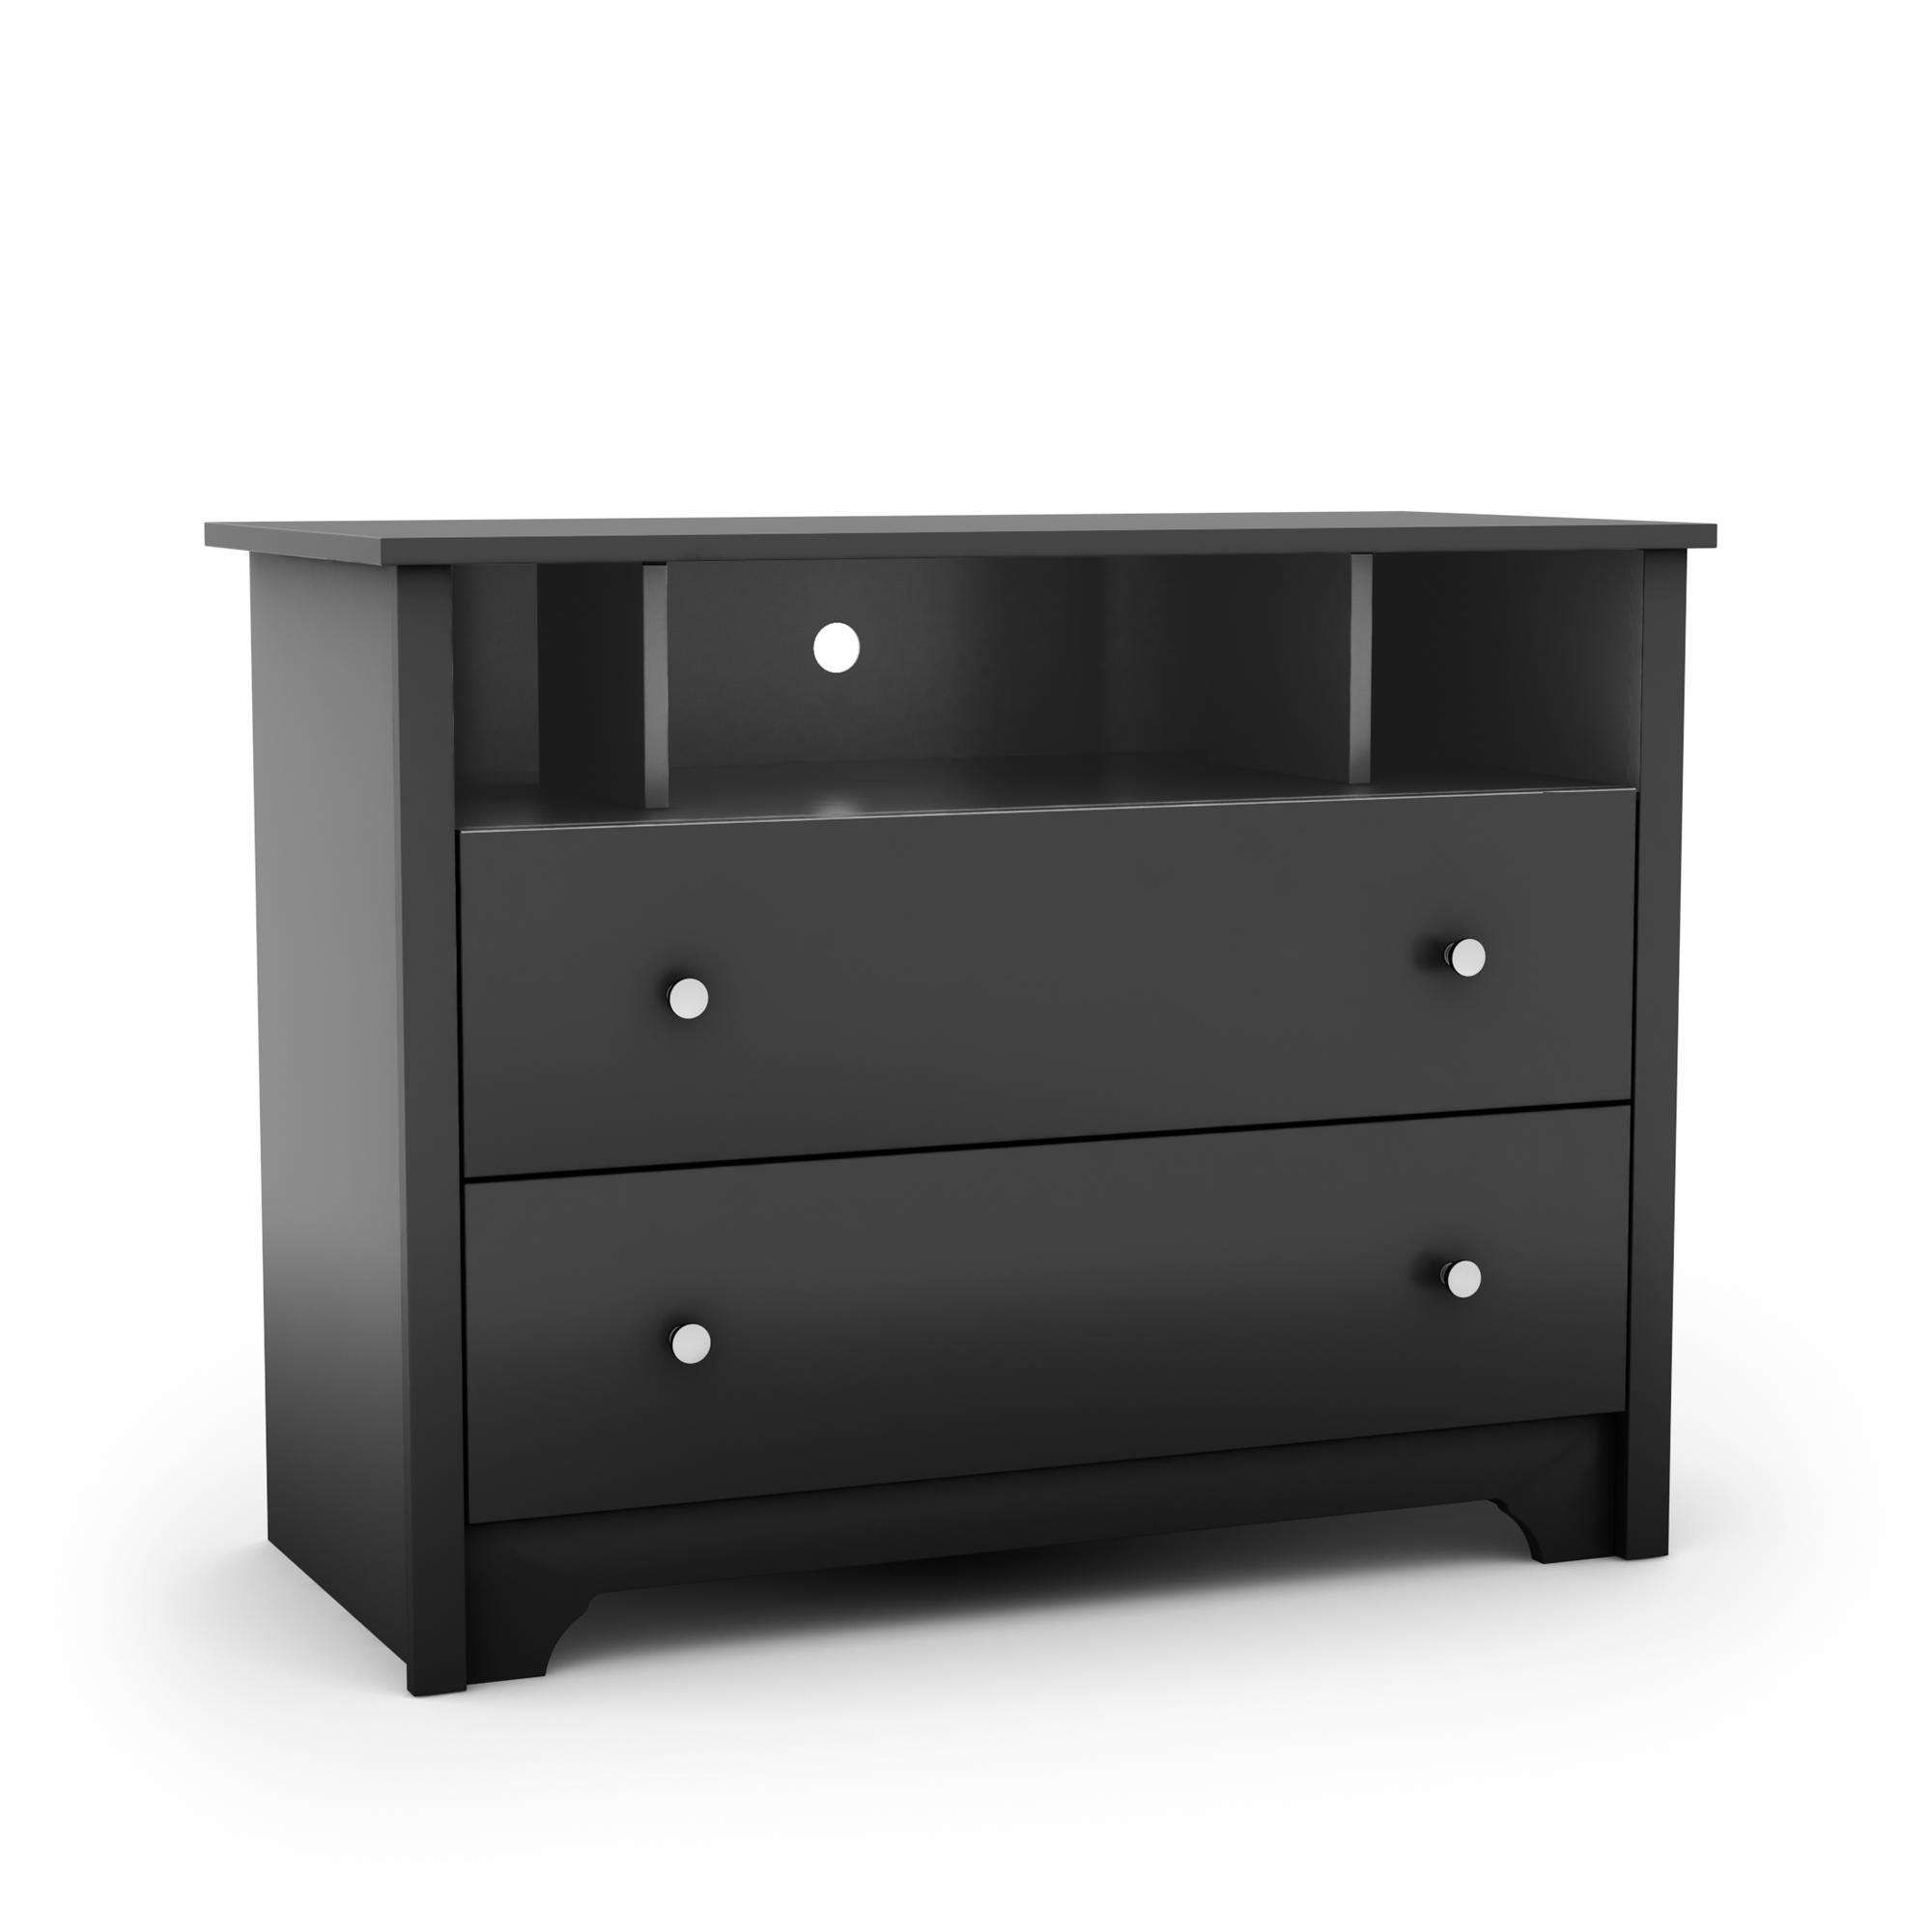 Square Black Tv Stand With Storage Drawers And Shelves Of Cool Tv Inside Black Tv Cabinets With Drawers (View 2 of 20)